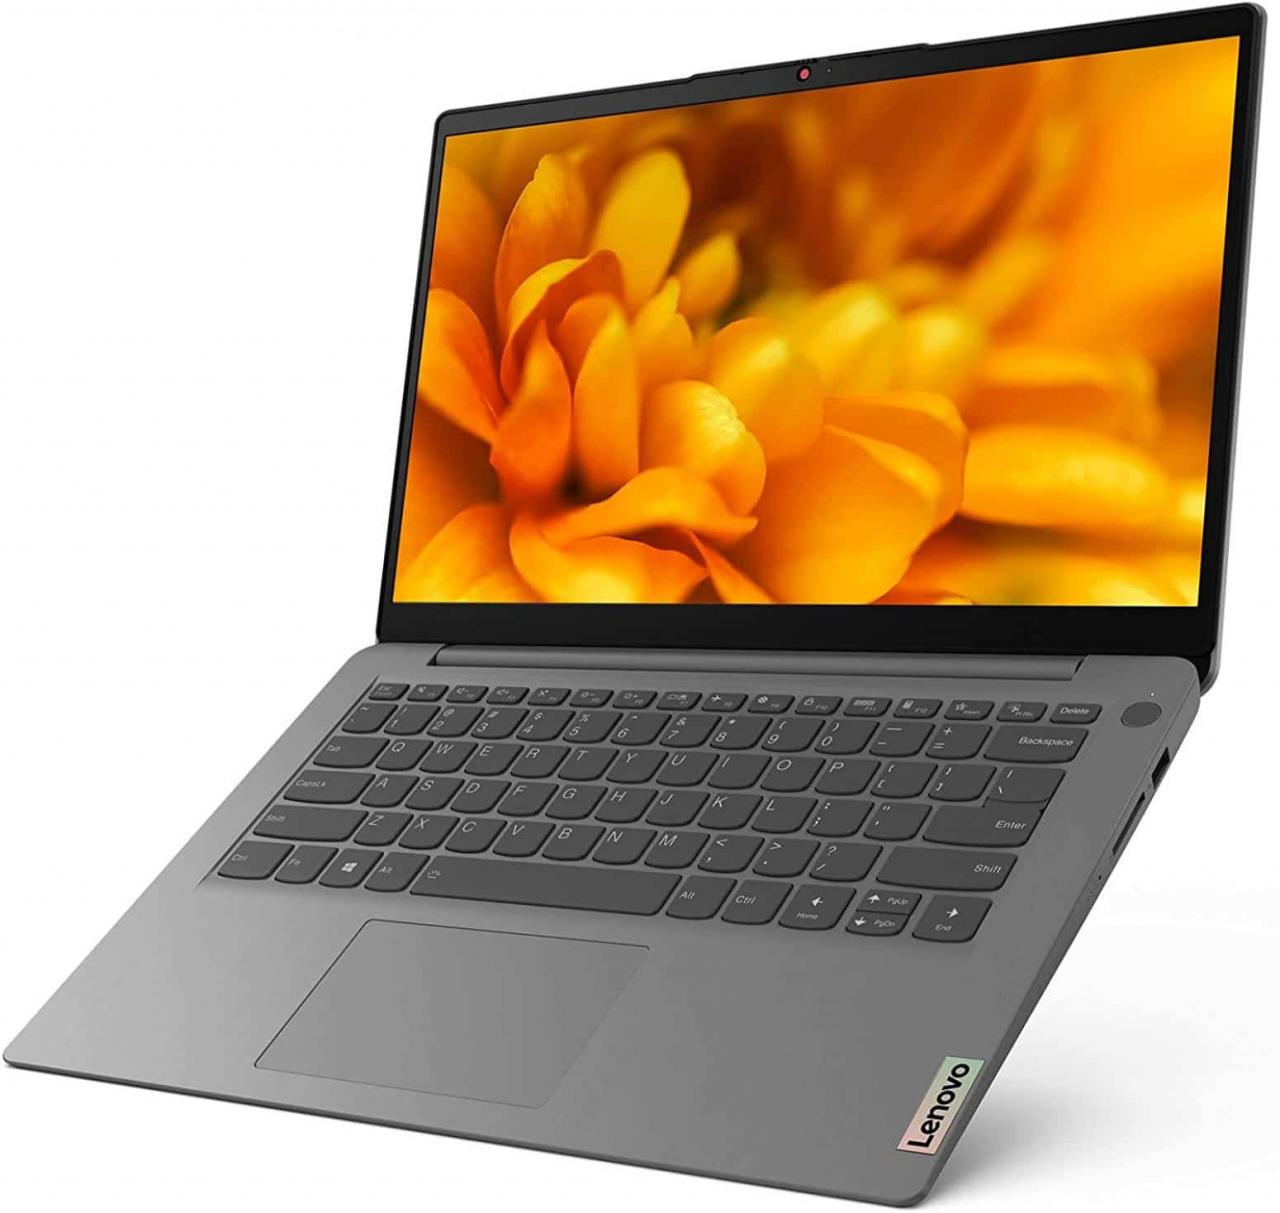 Lenovo IdeaPad 3 15ITL6 (82H8026CFR) Specs and Details